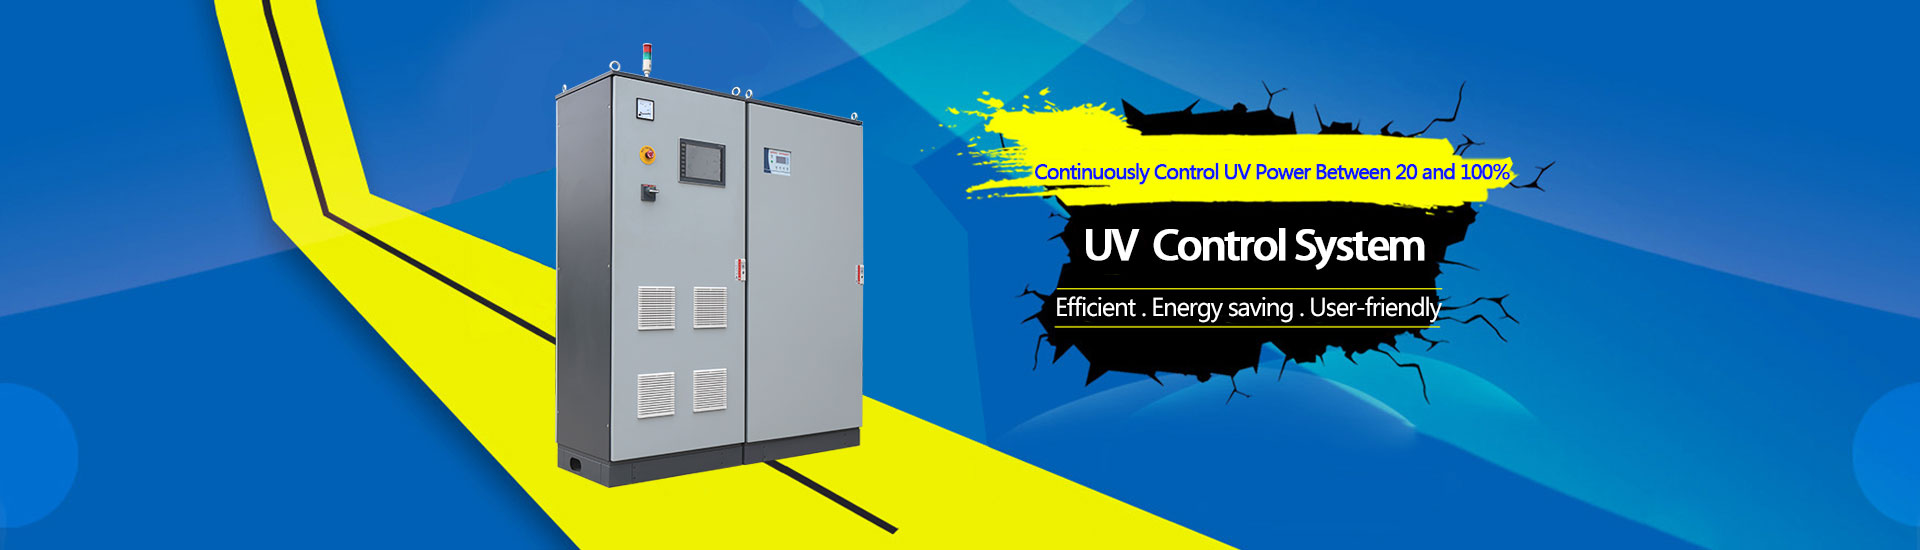 UV Curing Systems